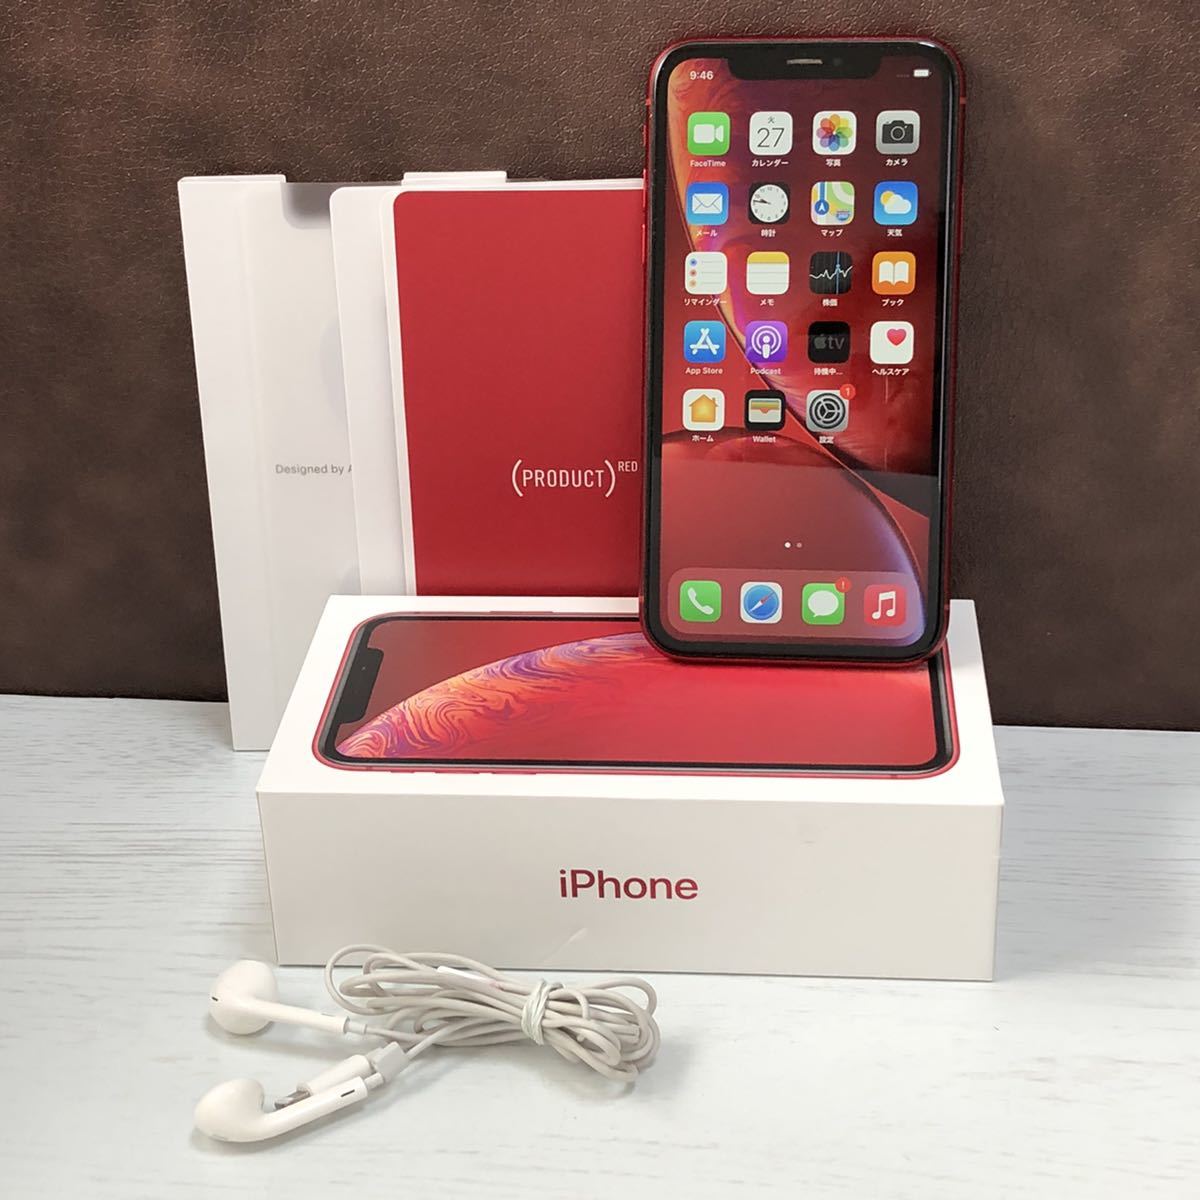 m161-0251 Apple iPhone XR 128GB PRODUCT RED A2106 MT0N2J/A SoftBank利用制限○ 元箱あり